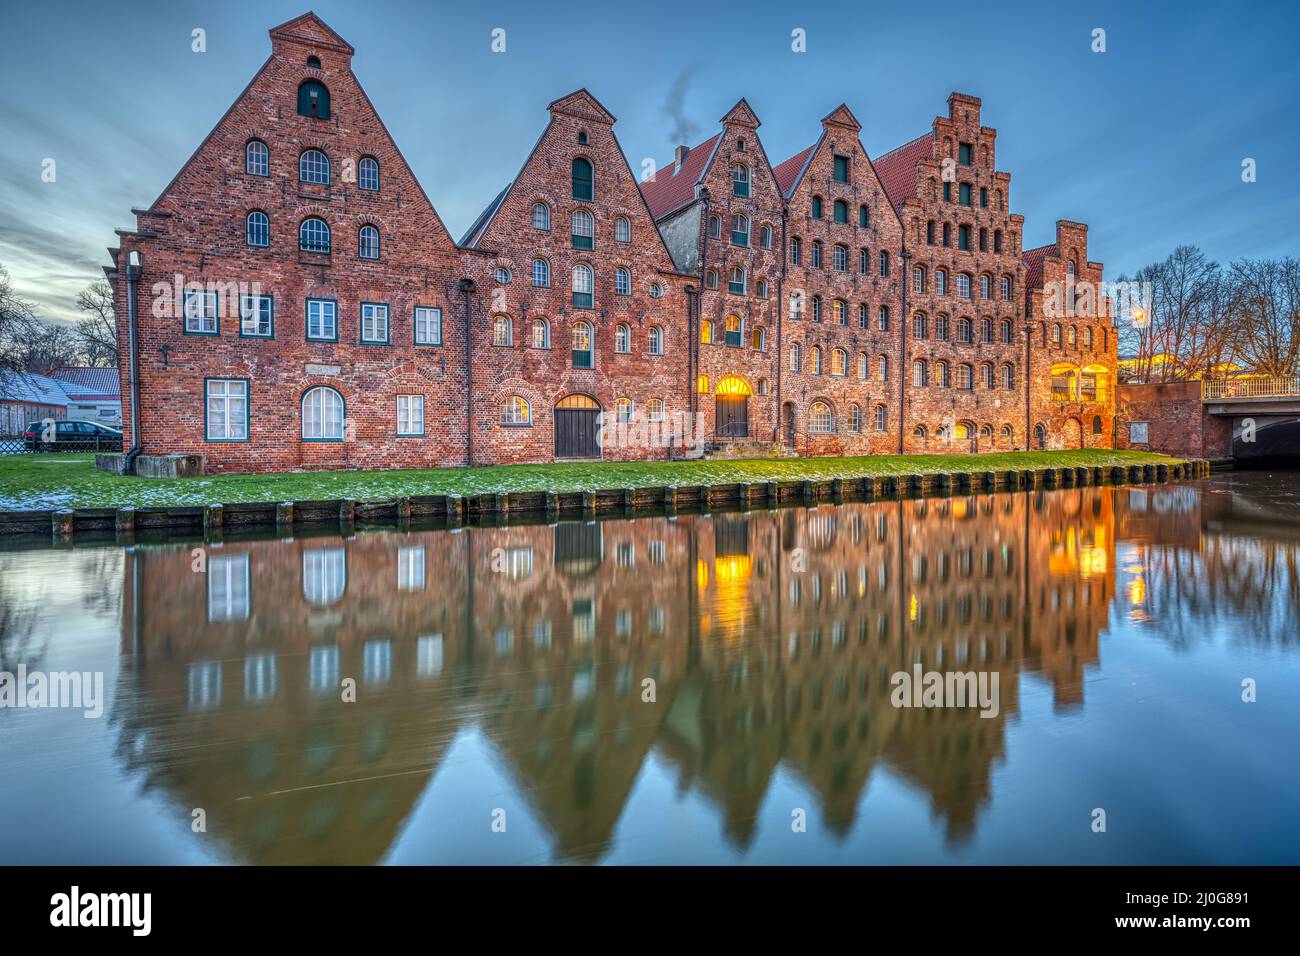 The historic Salzspeicher with the Trave river at dawn, seen in Luebeck, Germany Stock Photo